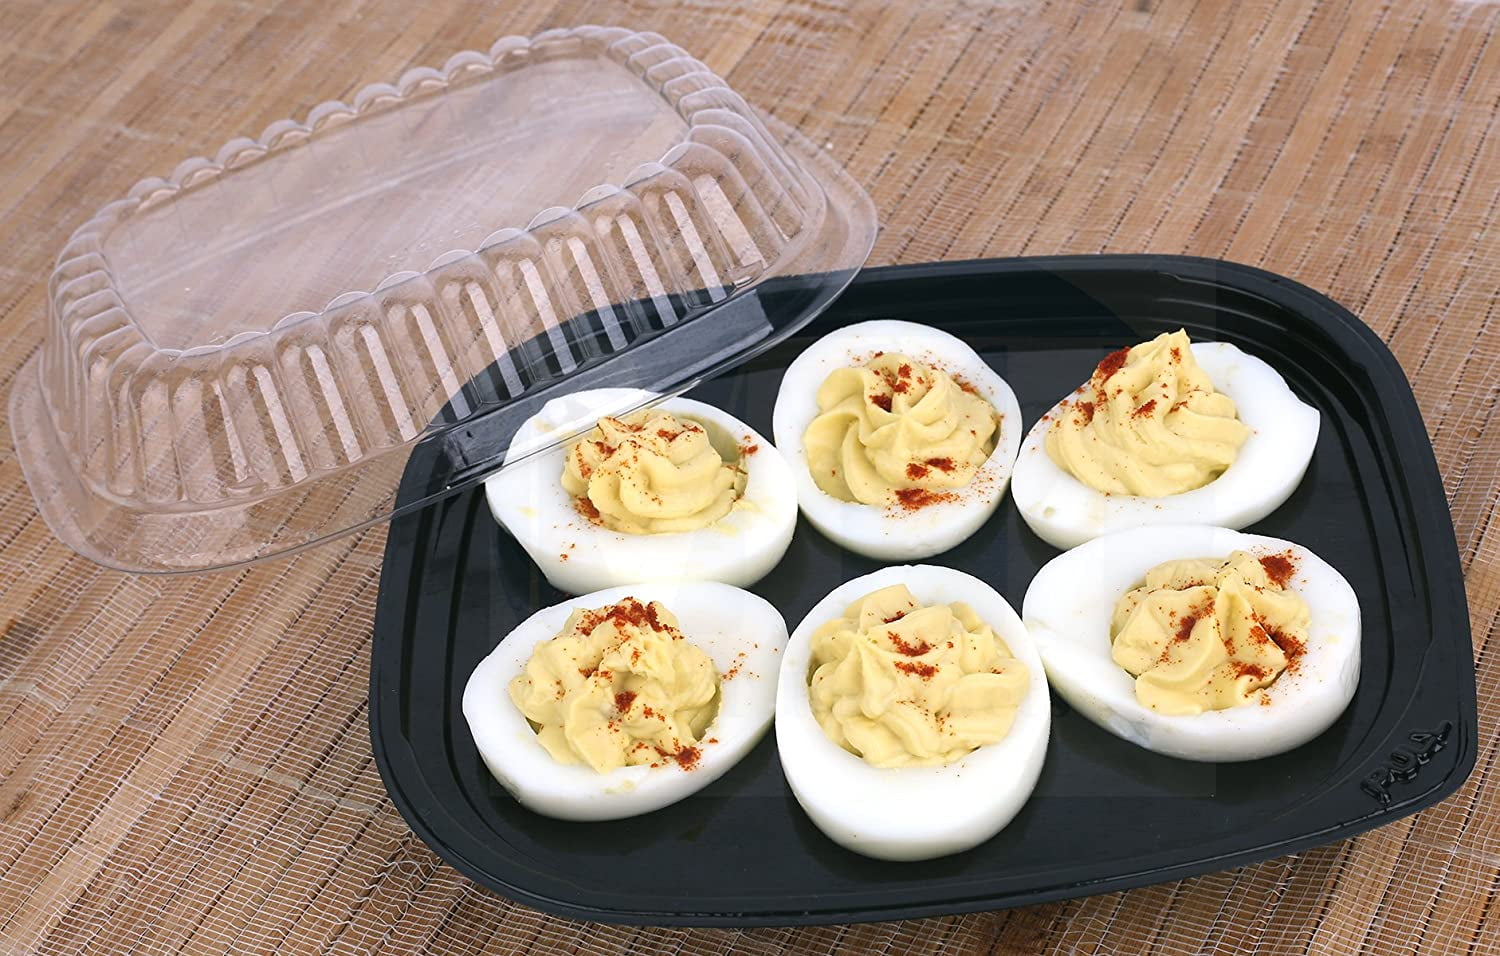 Lightweight Transport Devil Eggs Easily Decorating Kit Small Easy To Clean Deviled Egg Carrier With Lid Designed to Hold 24 Deviled Eggs 2 Removable Deviled Egg Trays Fit Devil Egg Perfectly 